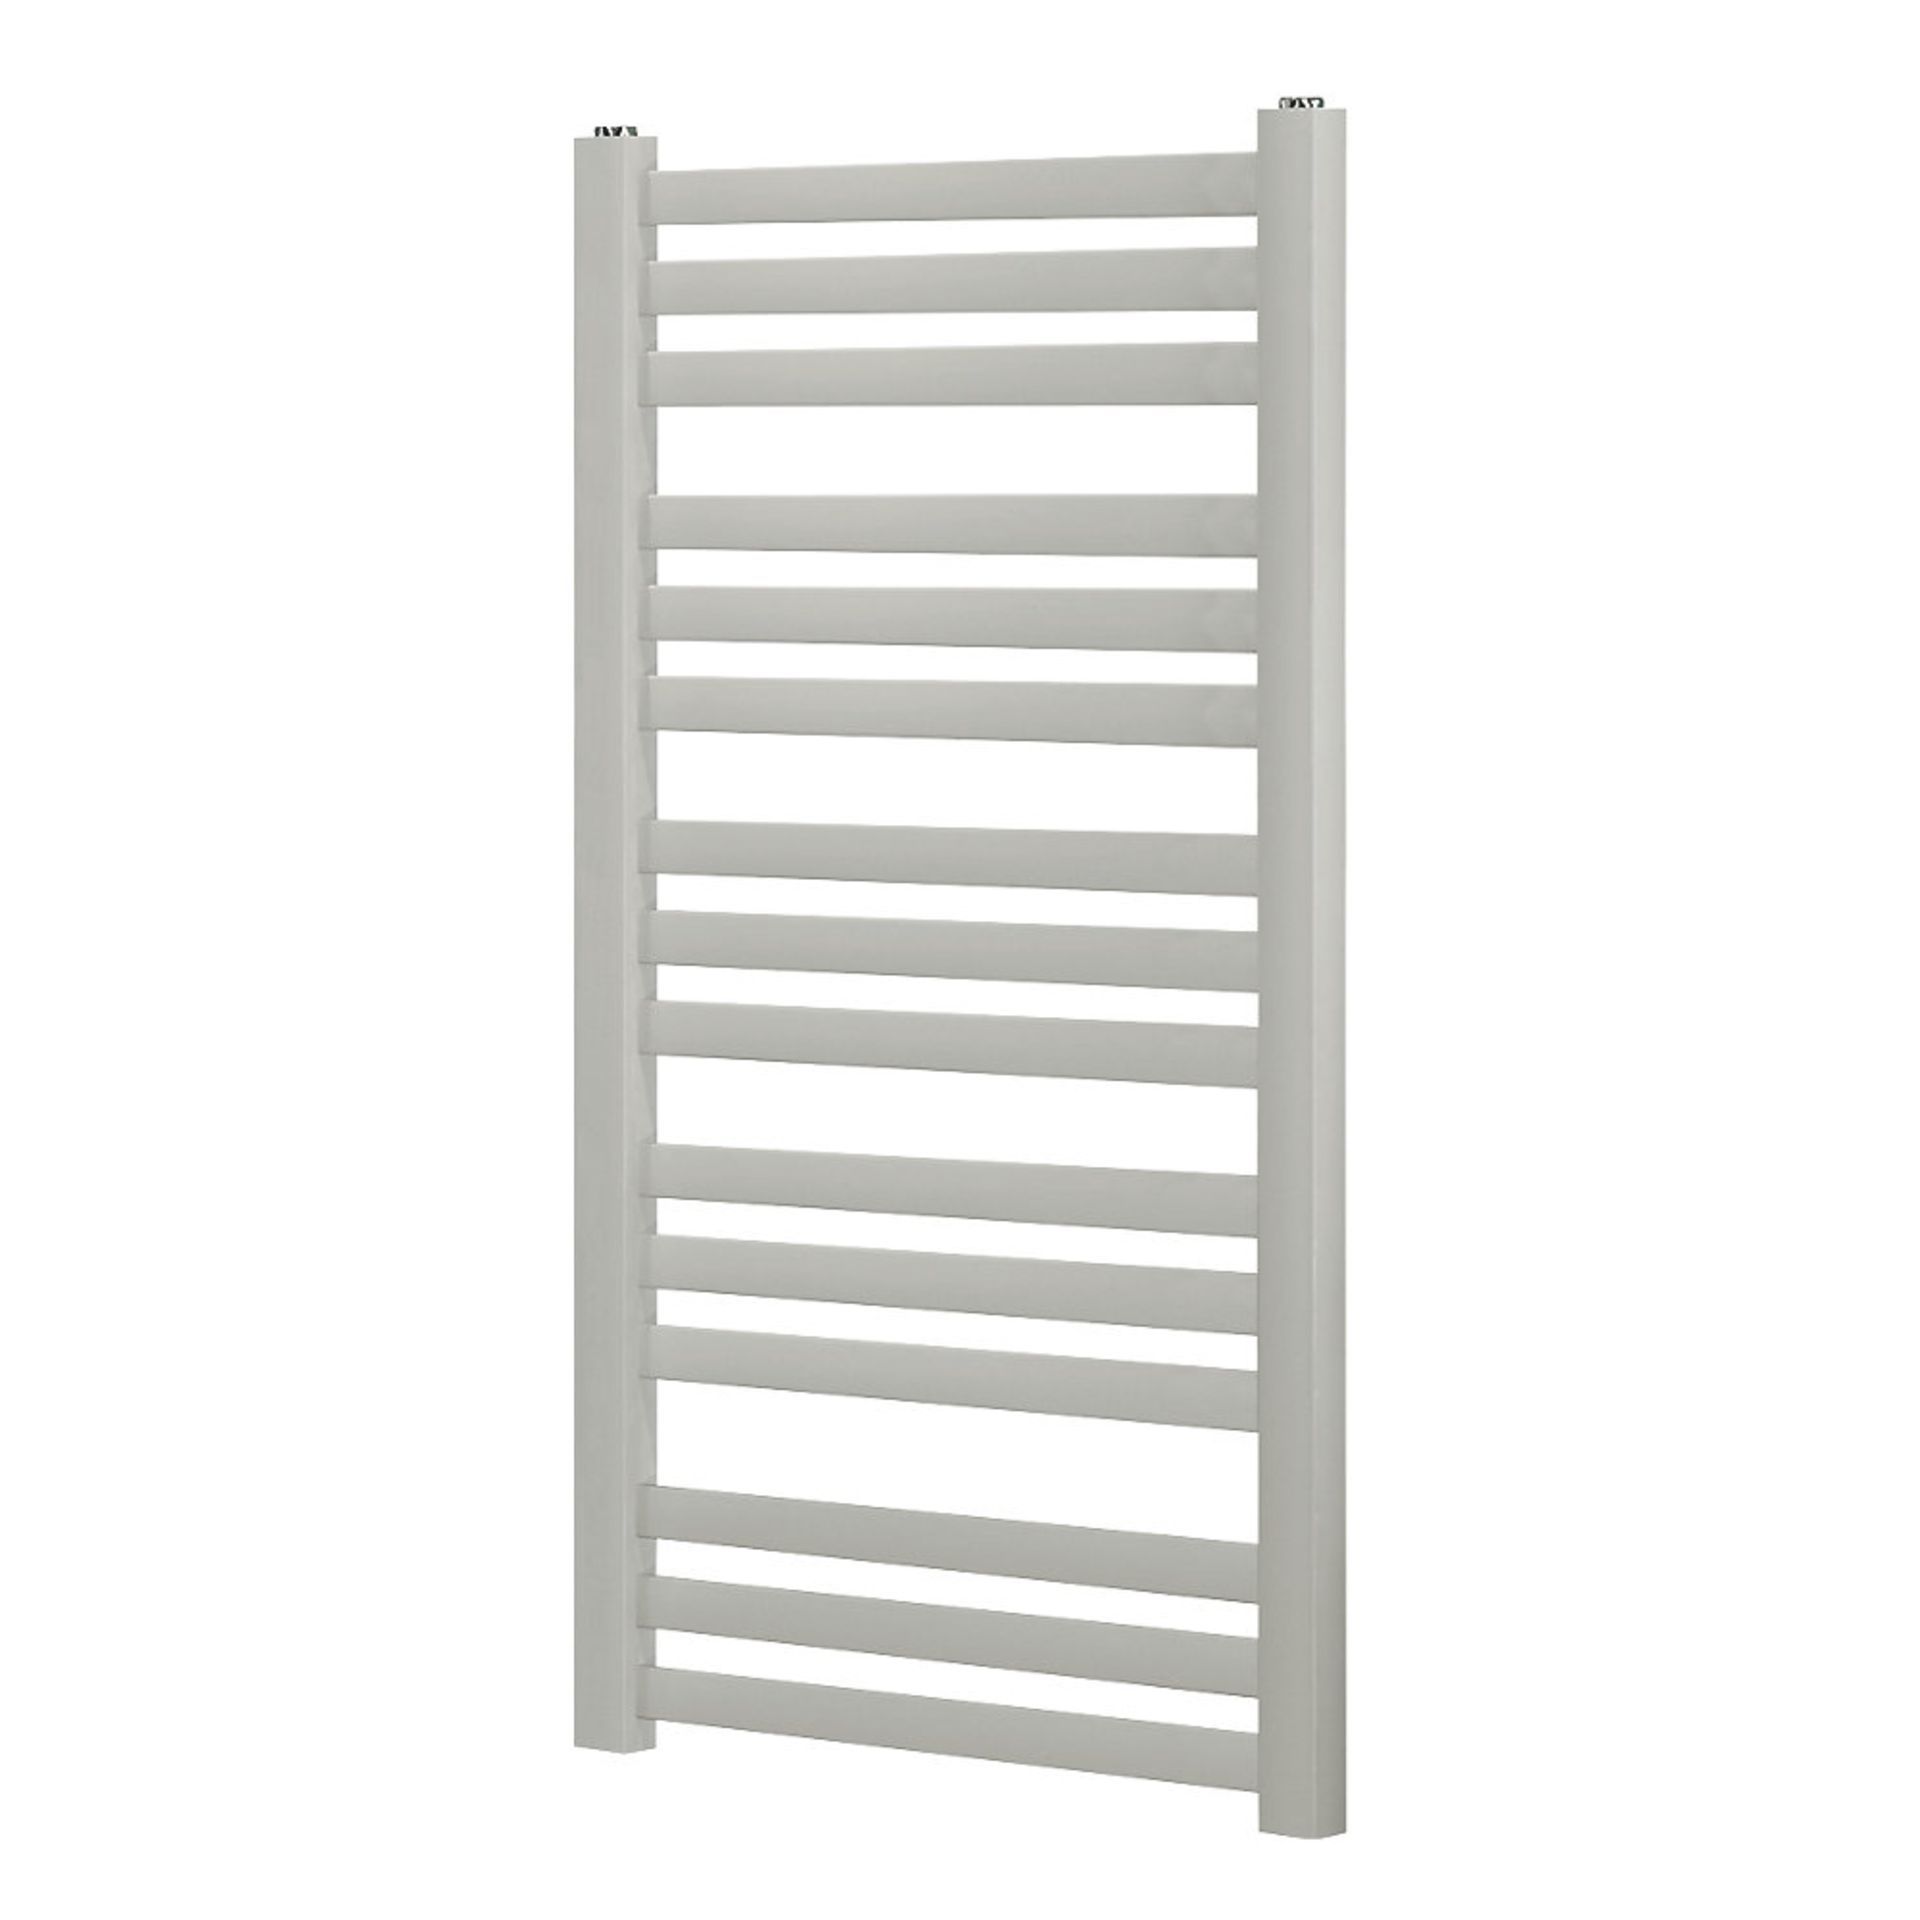 New (H29) 900x500mm Angled Bar Towel Radiator Silver. High Quality Powder-Coated Steel Constru... - Image 3 of 3